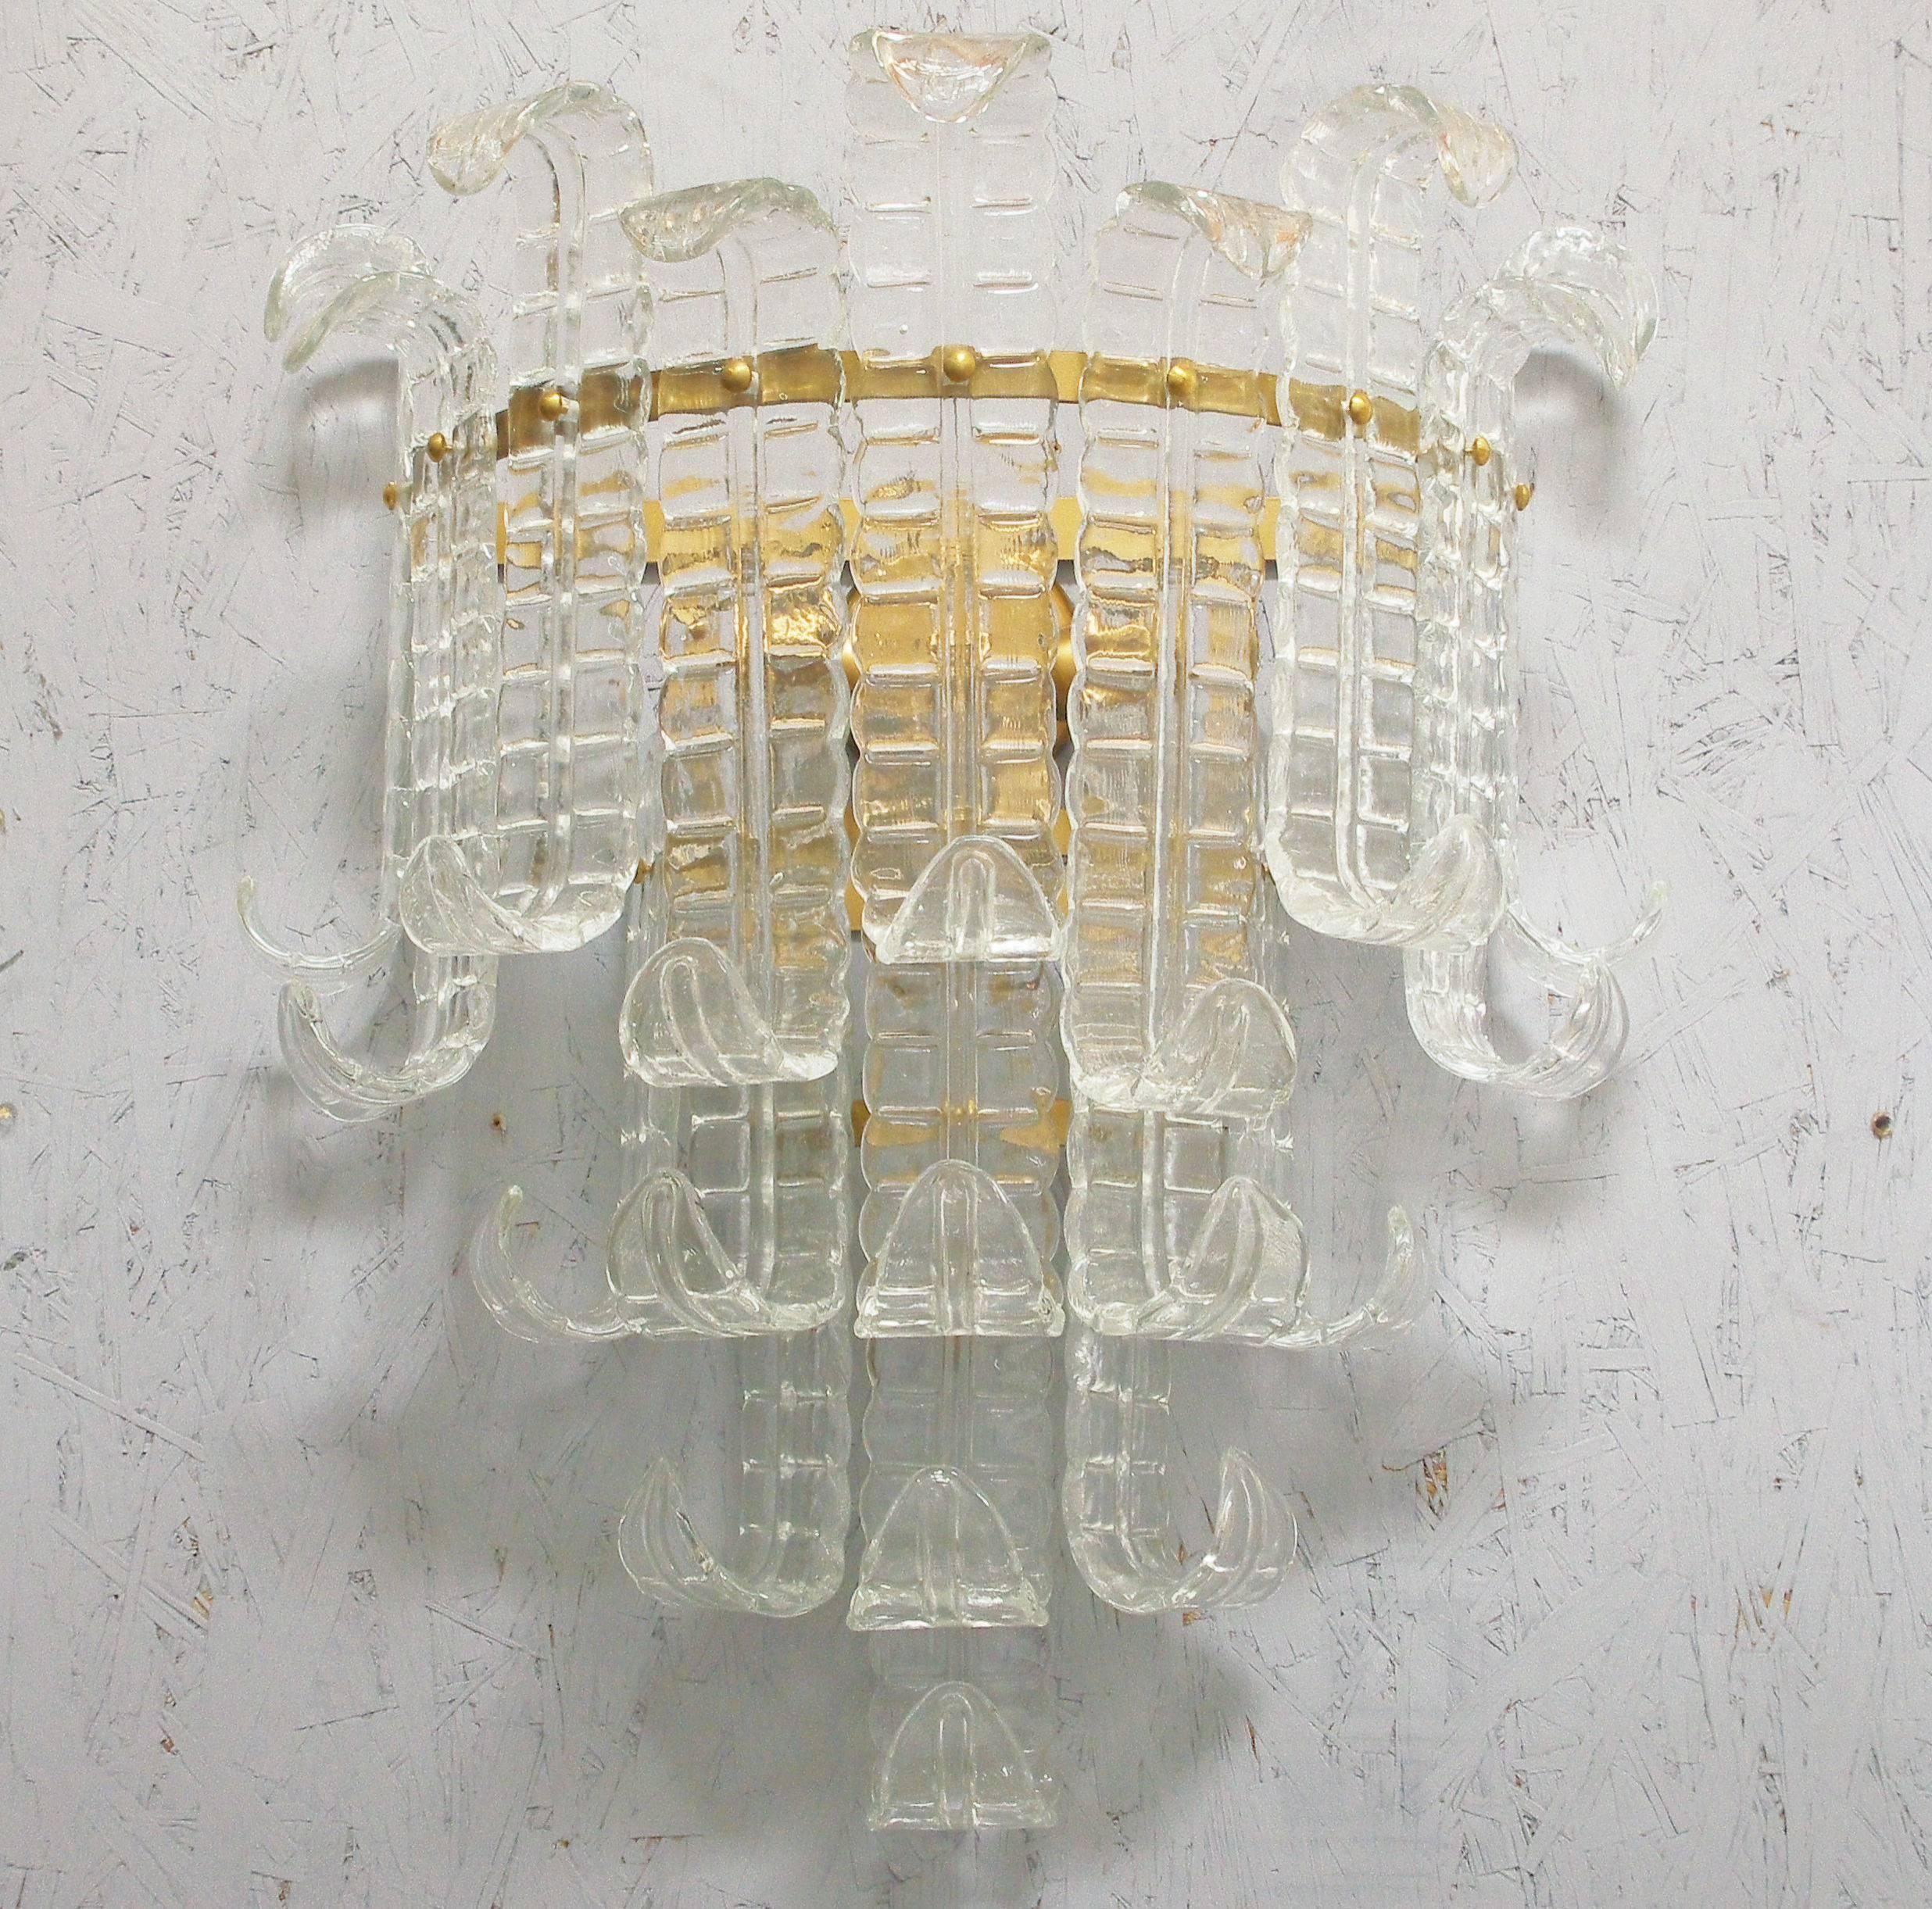 Pair of vintage Italian sconces with textured clear Murano glass crafted in Felci technique, mounted on brass frame / Designed by Barovier e Toso, circa 1960s / Made in Italy.

